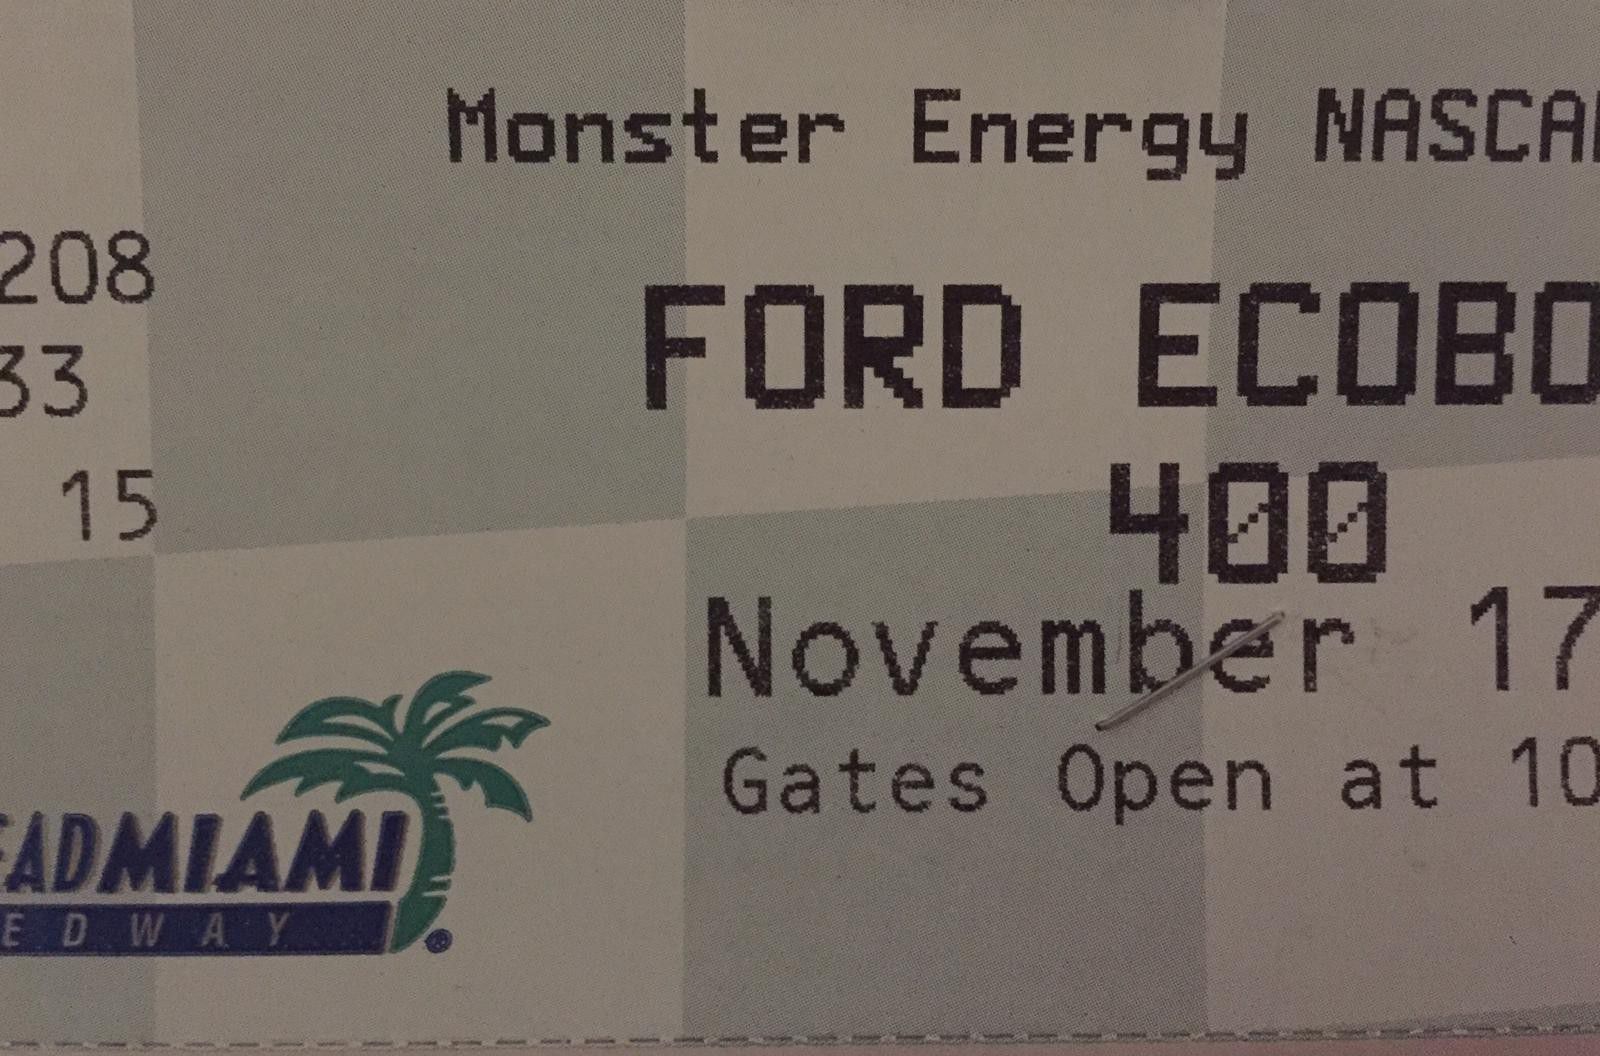 Nascar 4 homestead speedway tickets Grandstand sold out Sunday November 17 Asking for all 4 $220.00 obo Original price for each $105 plus fees